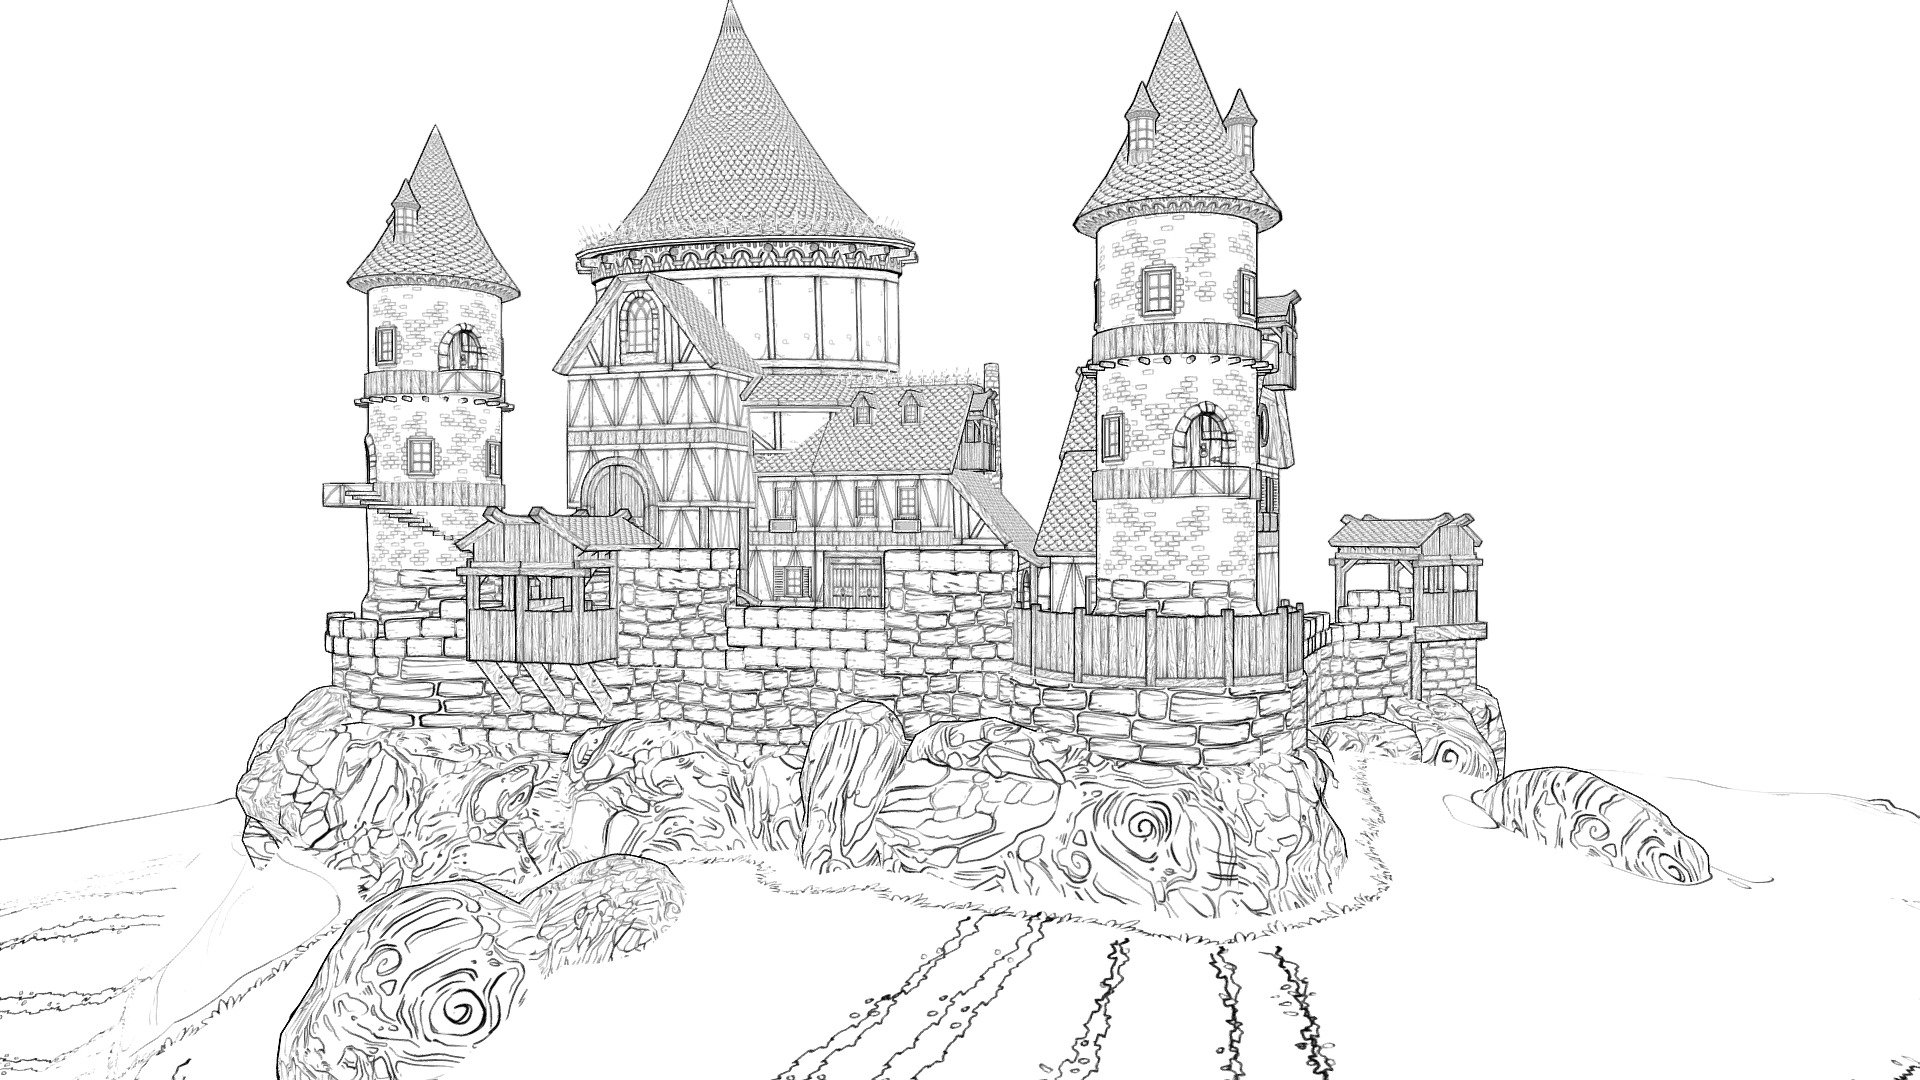 This is a Castle I made for a comic using 2D details.

Here you can see how I made the textures and how a model like this would be built for making comics.

If you purchase the model you will get the textures I used so you can disect them and see how you can create your own, you can also use the textures in your personal project 3d model